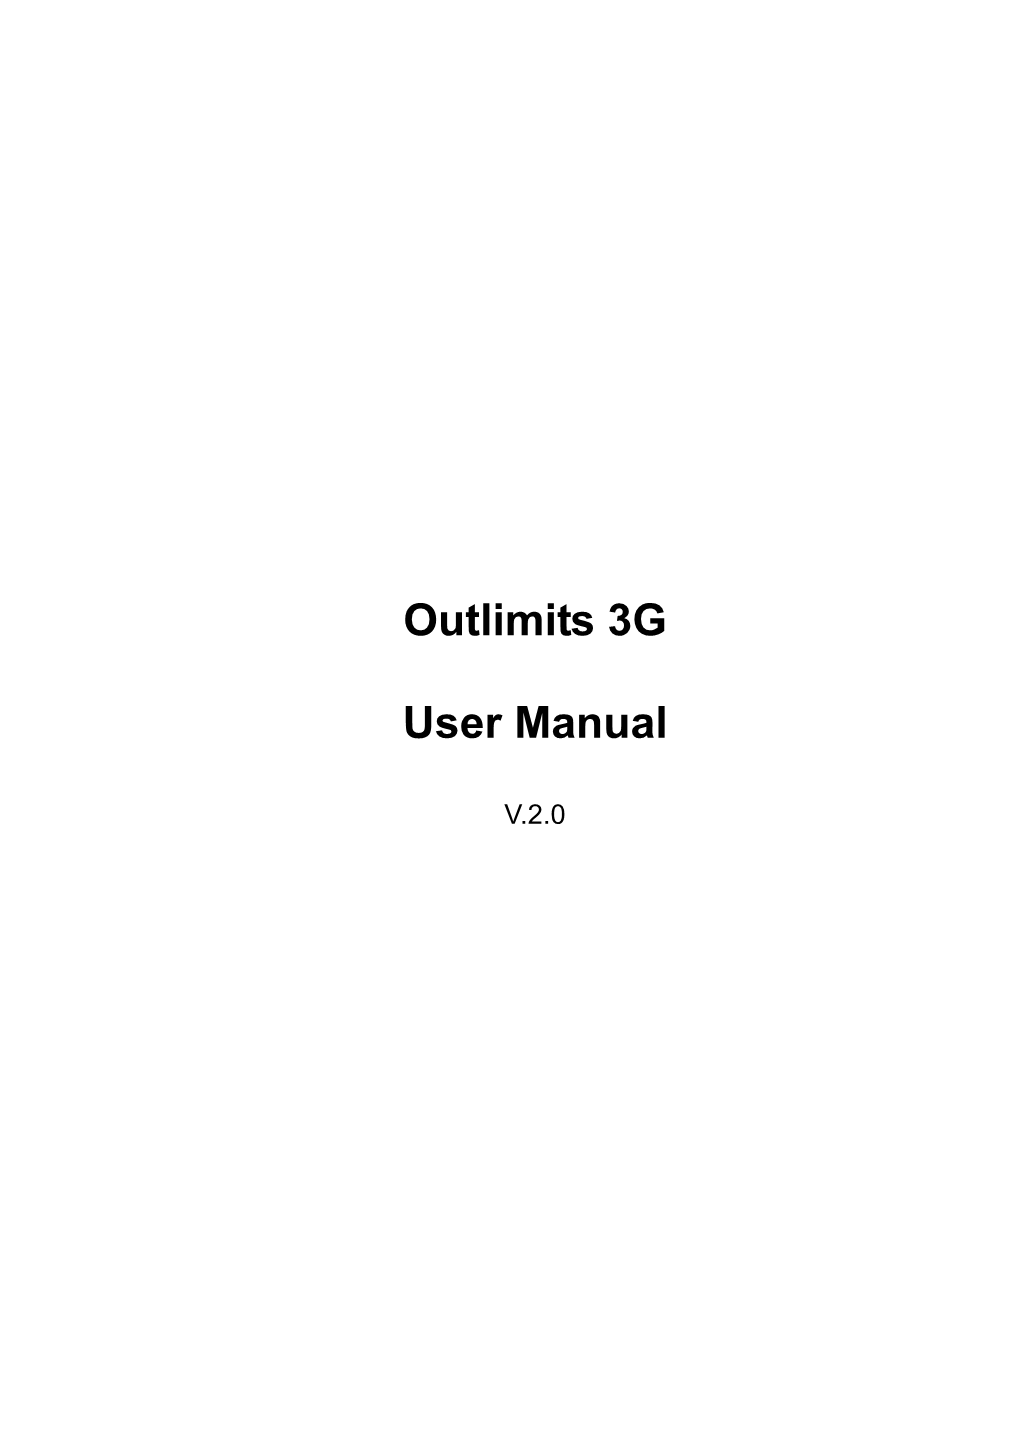 Outlimits 3G User Manual